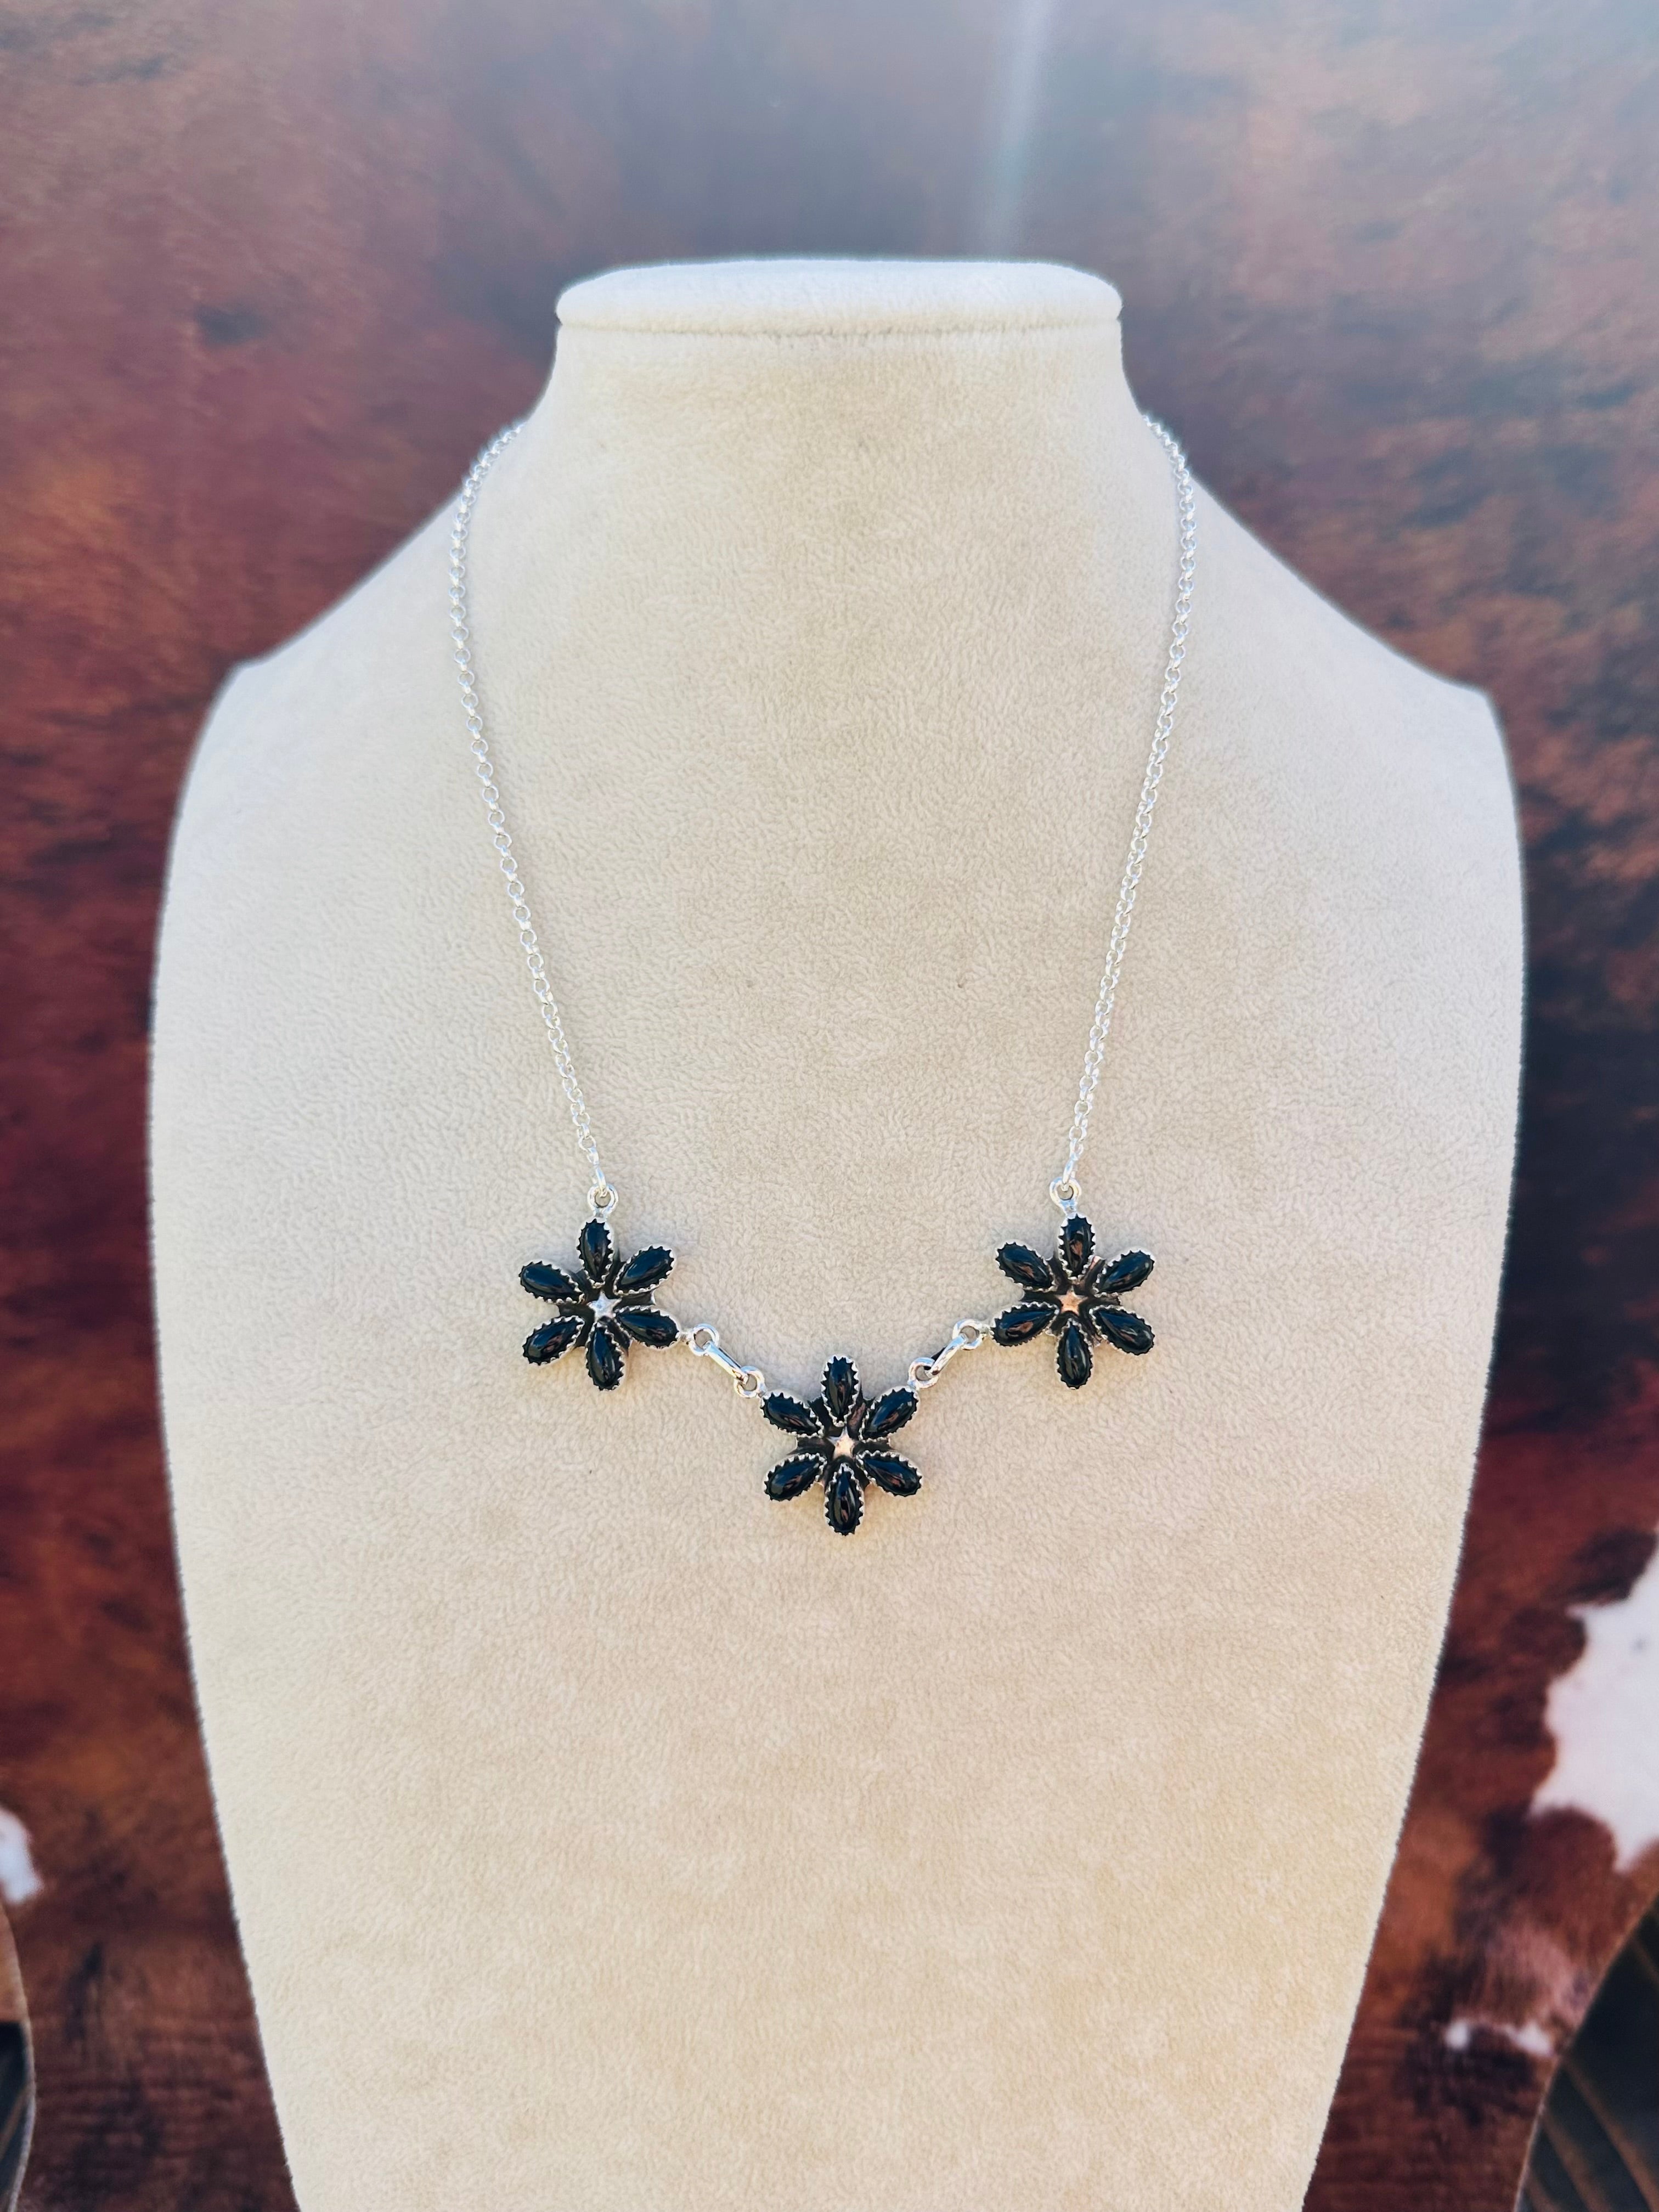 Southwest Handmade Onyx & Sterling Silver Cluster Necklace